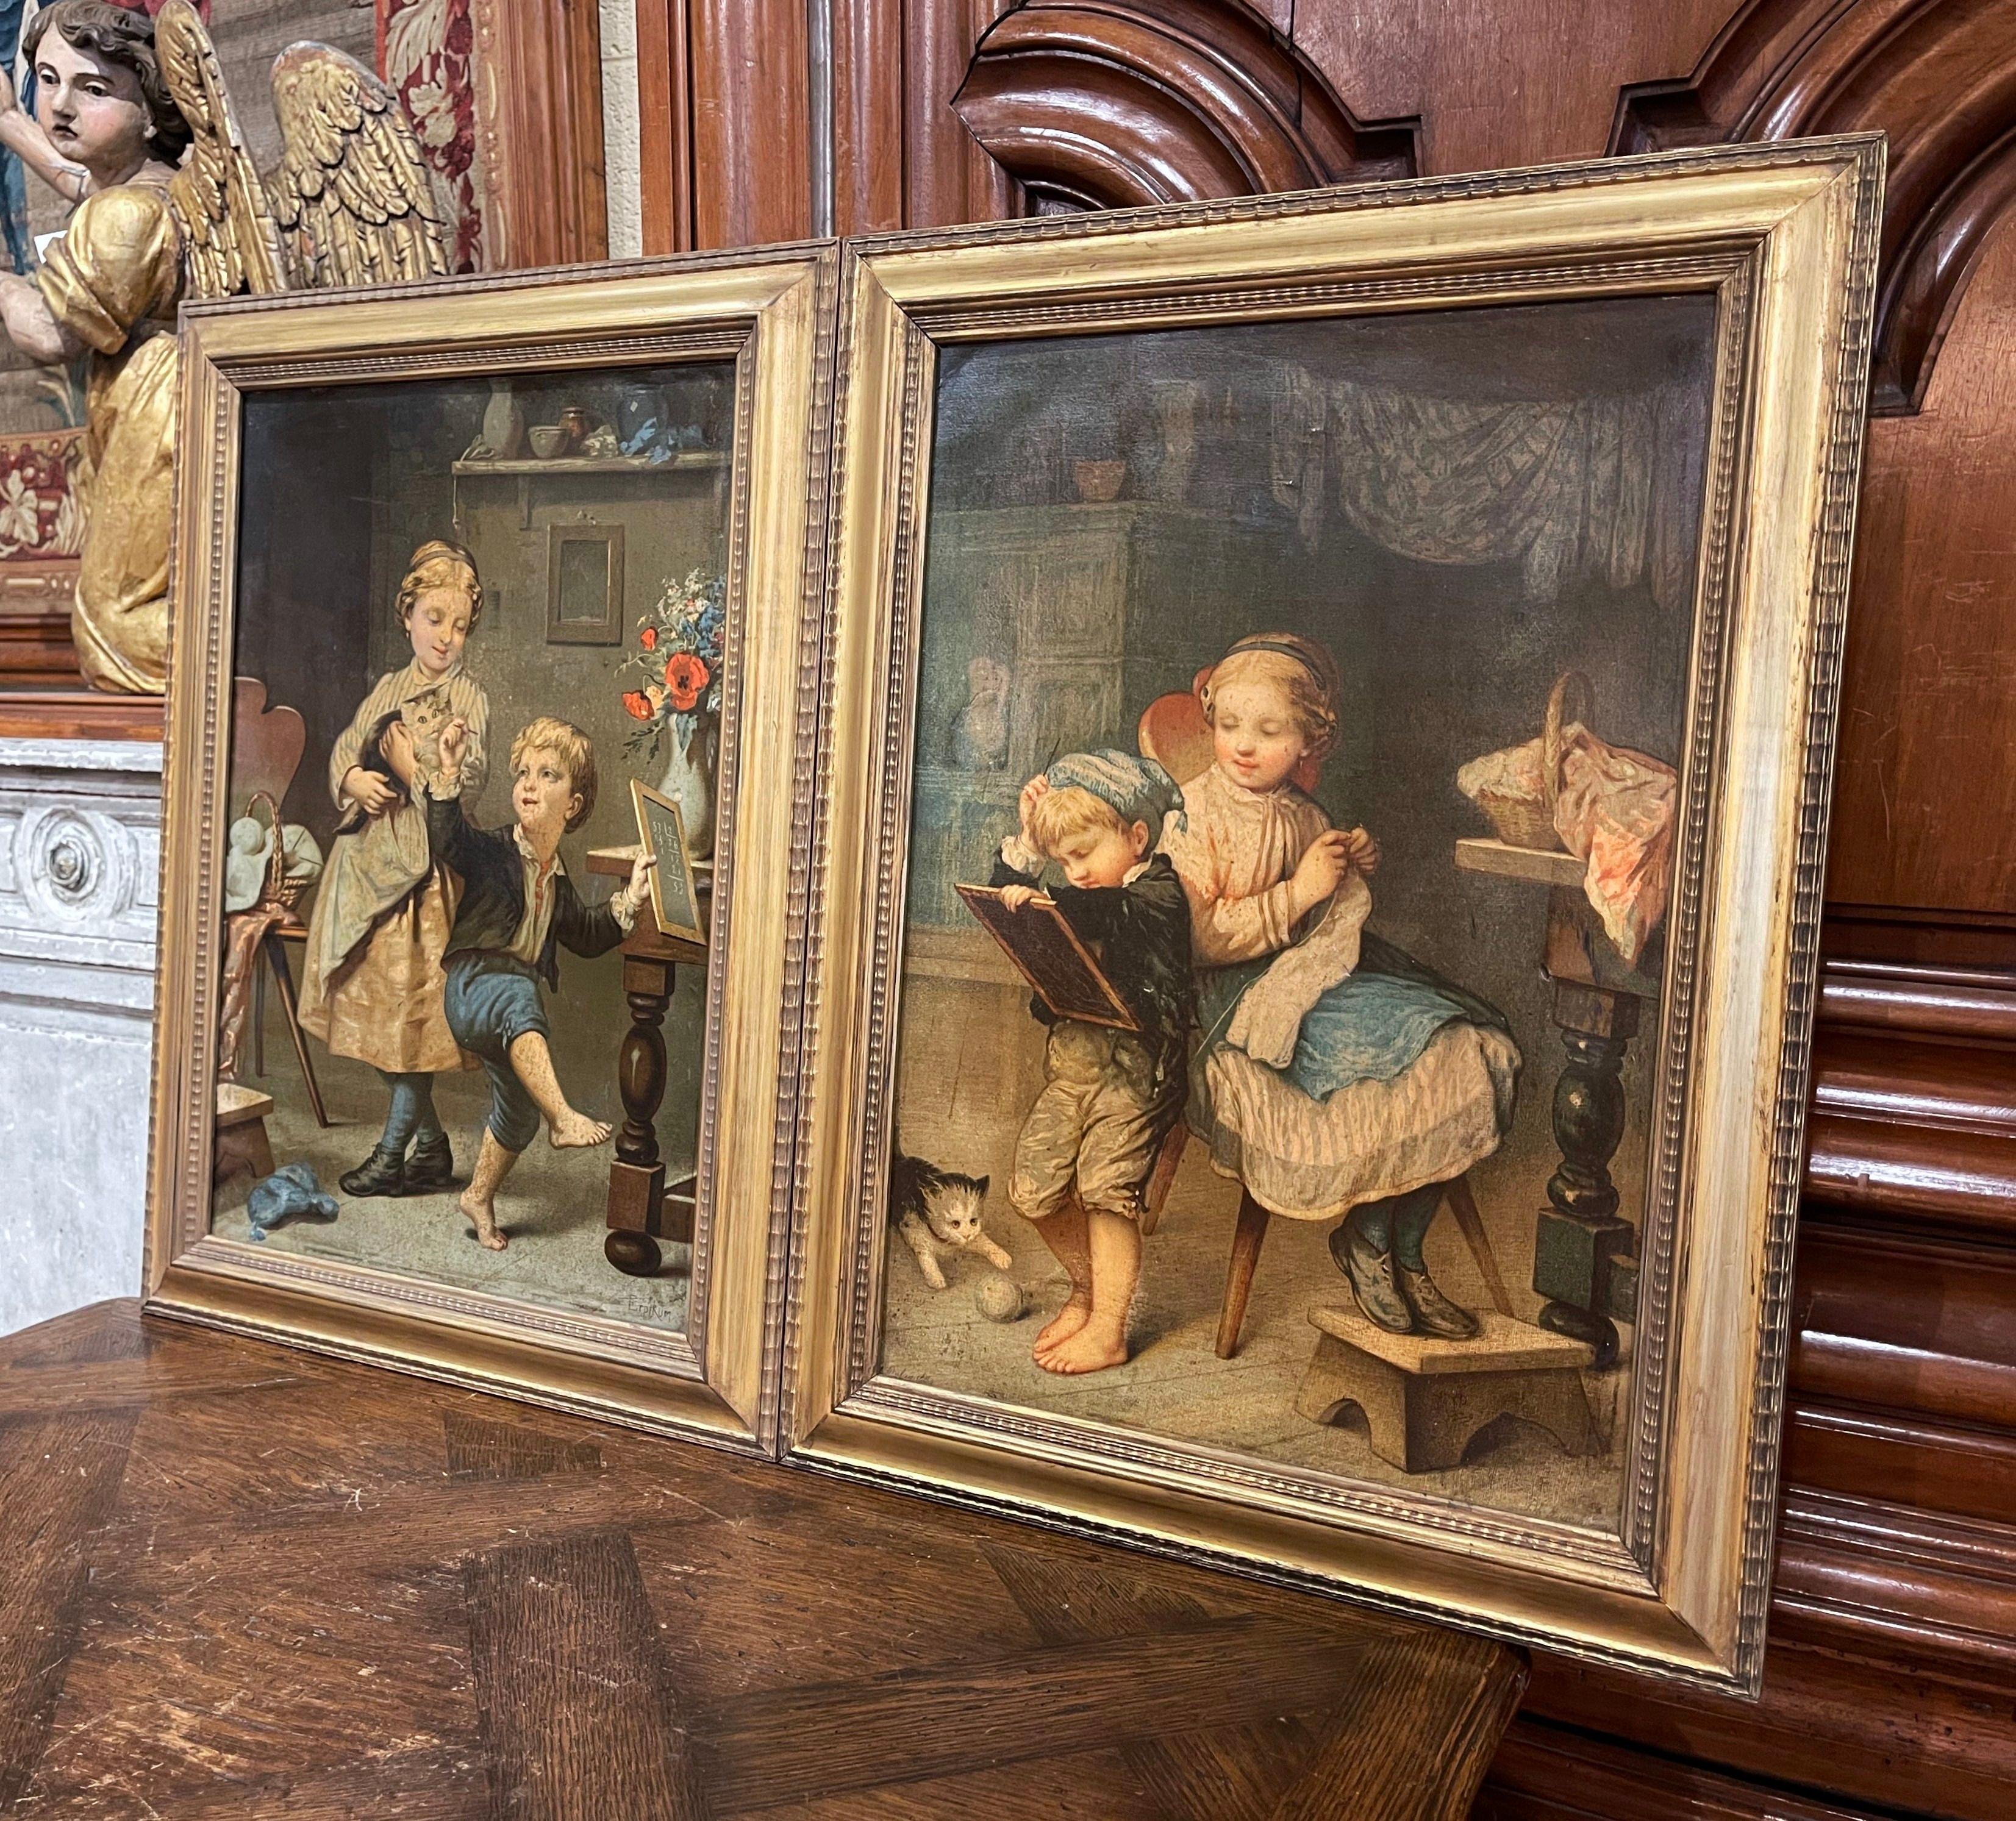 These elegant antique chromo lithographs were created in Normandy circa 1880. Set in a carved gilt frame from later addition, each artwork depicts joyful children at play; both scenes depict a young boy learning arithmetic supervised by her older